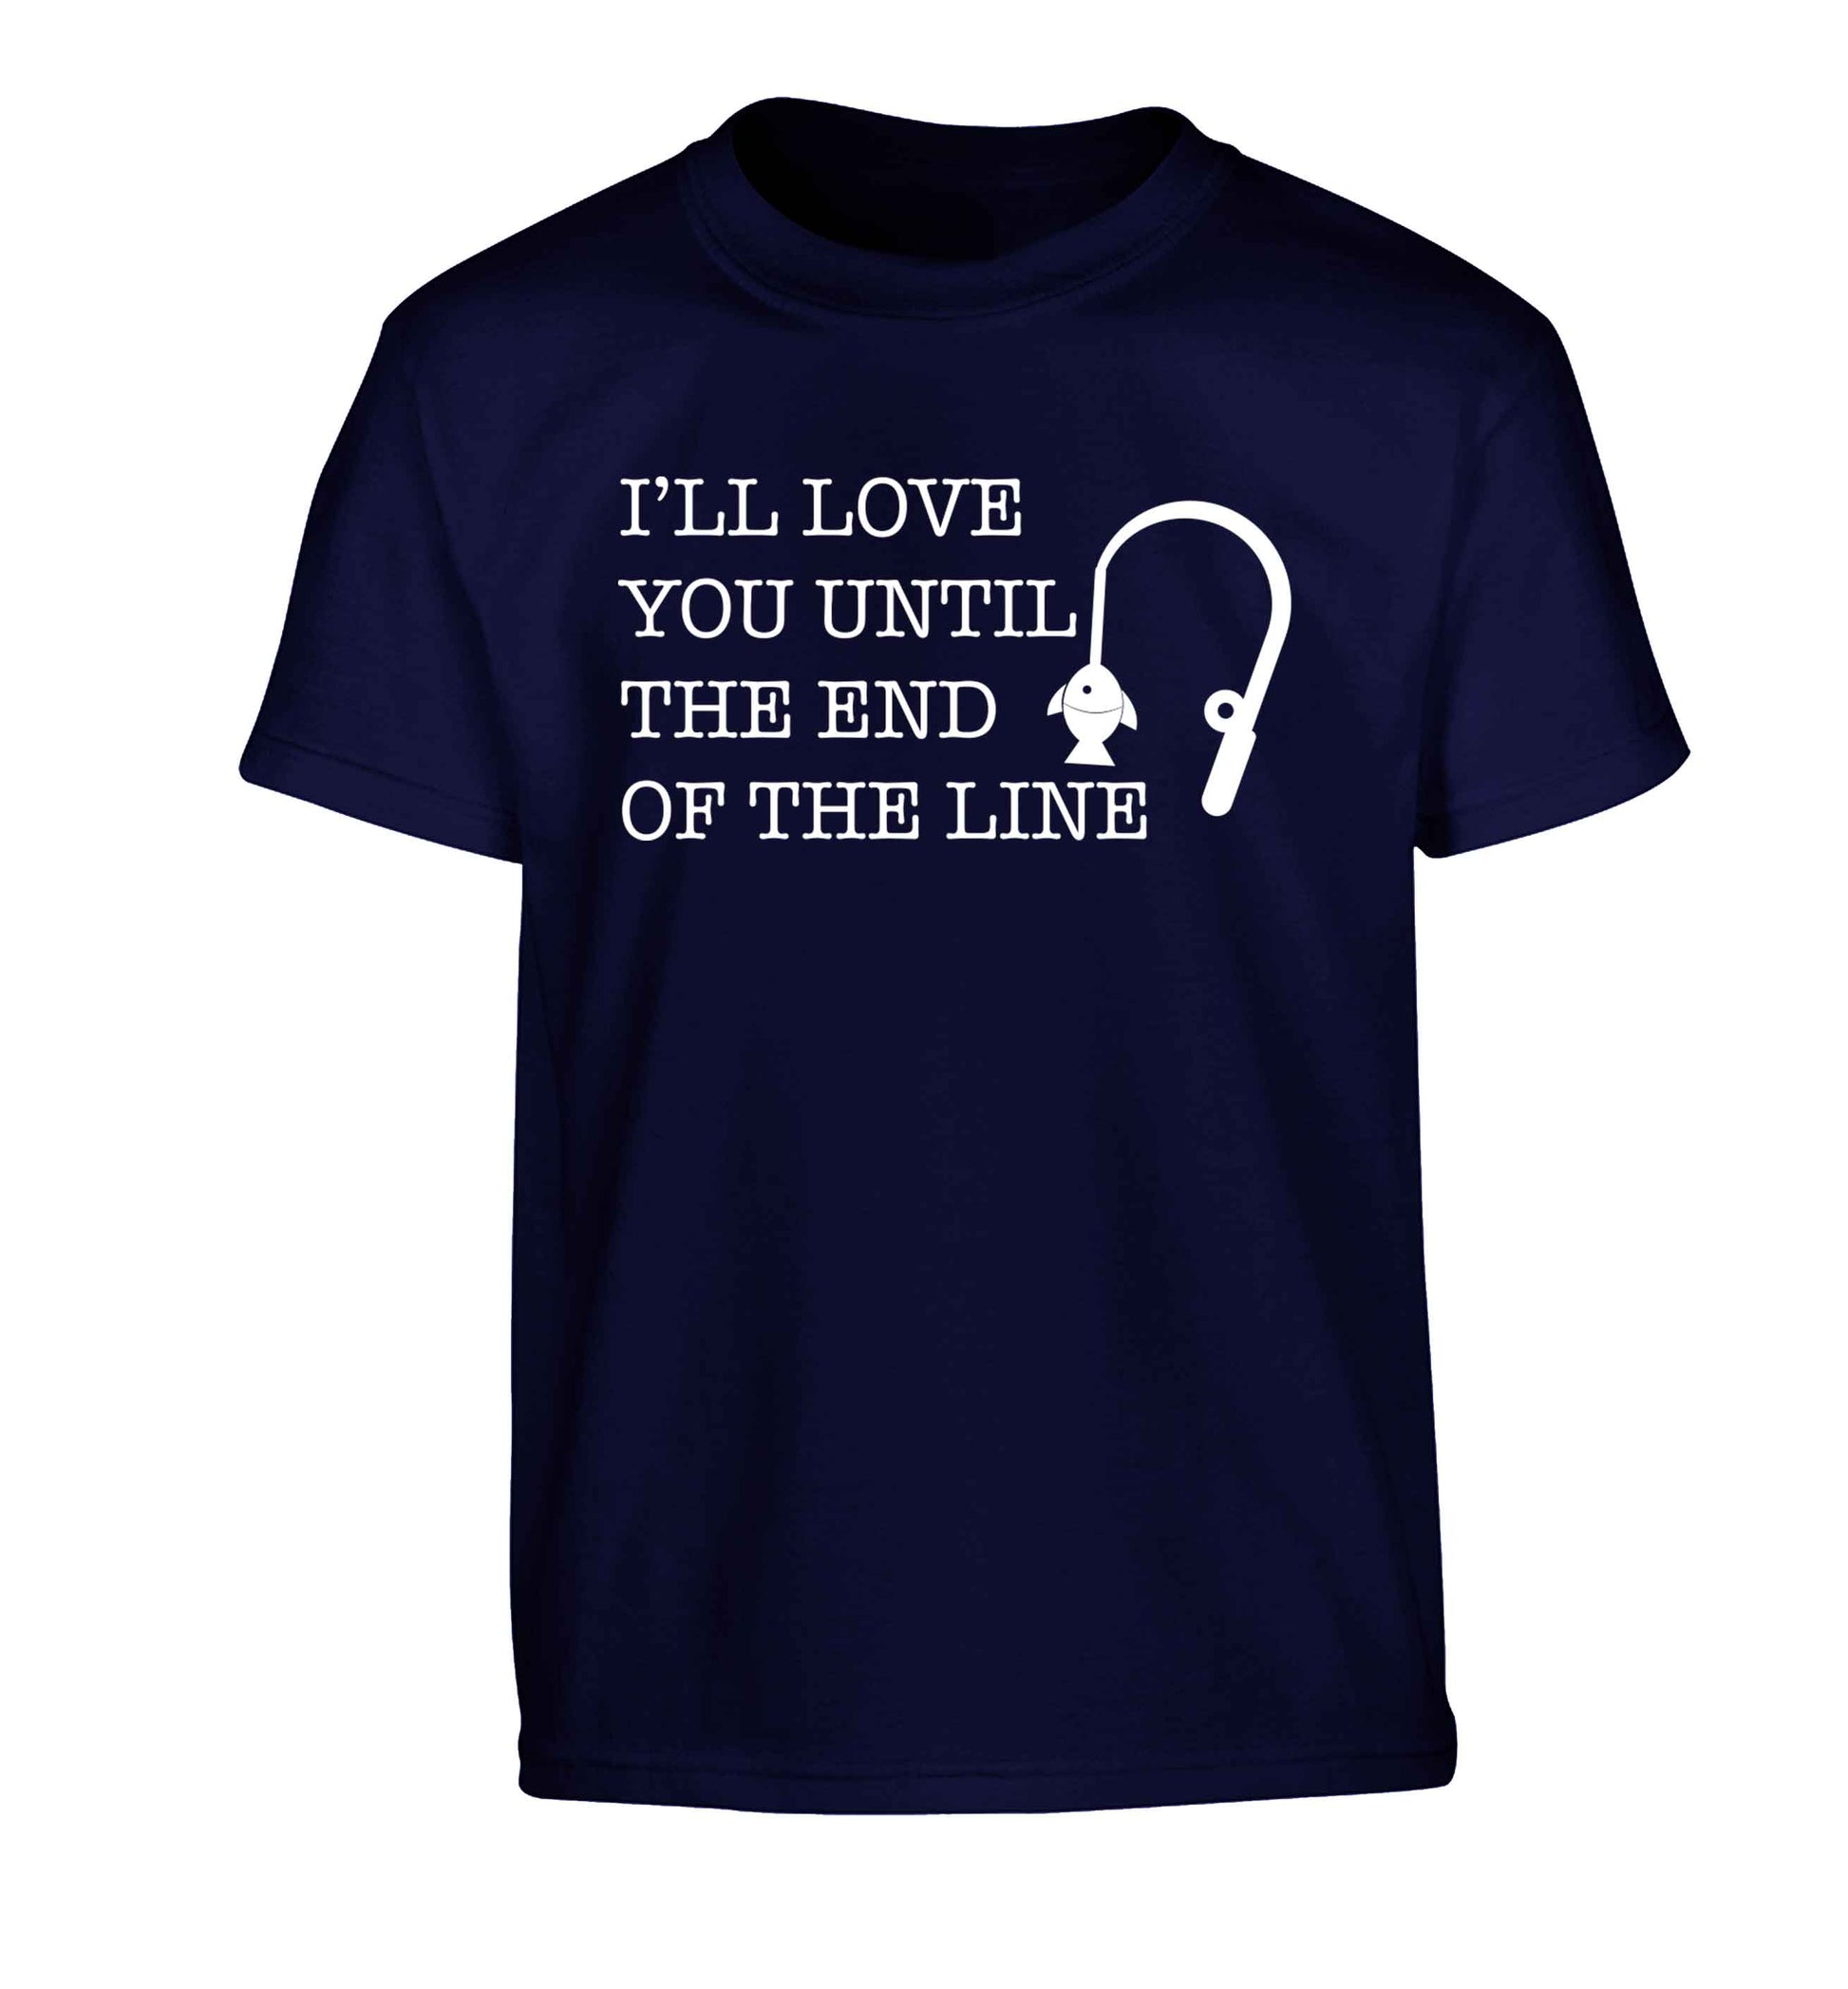 I'll love you until the end of the line Children's navy Tshirt 12-13 Years